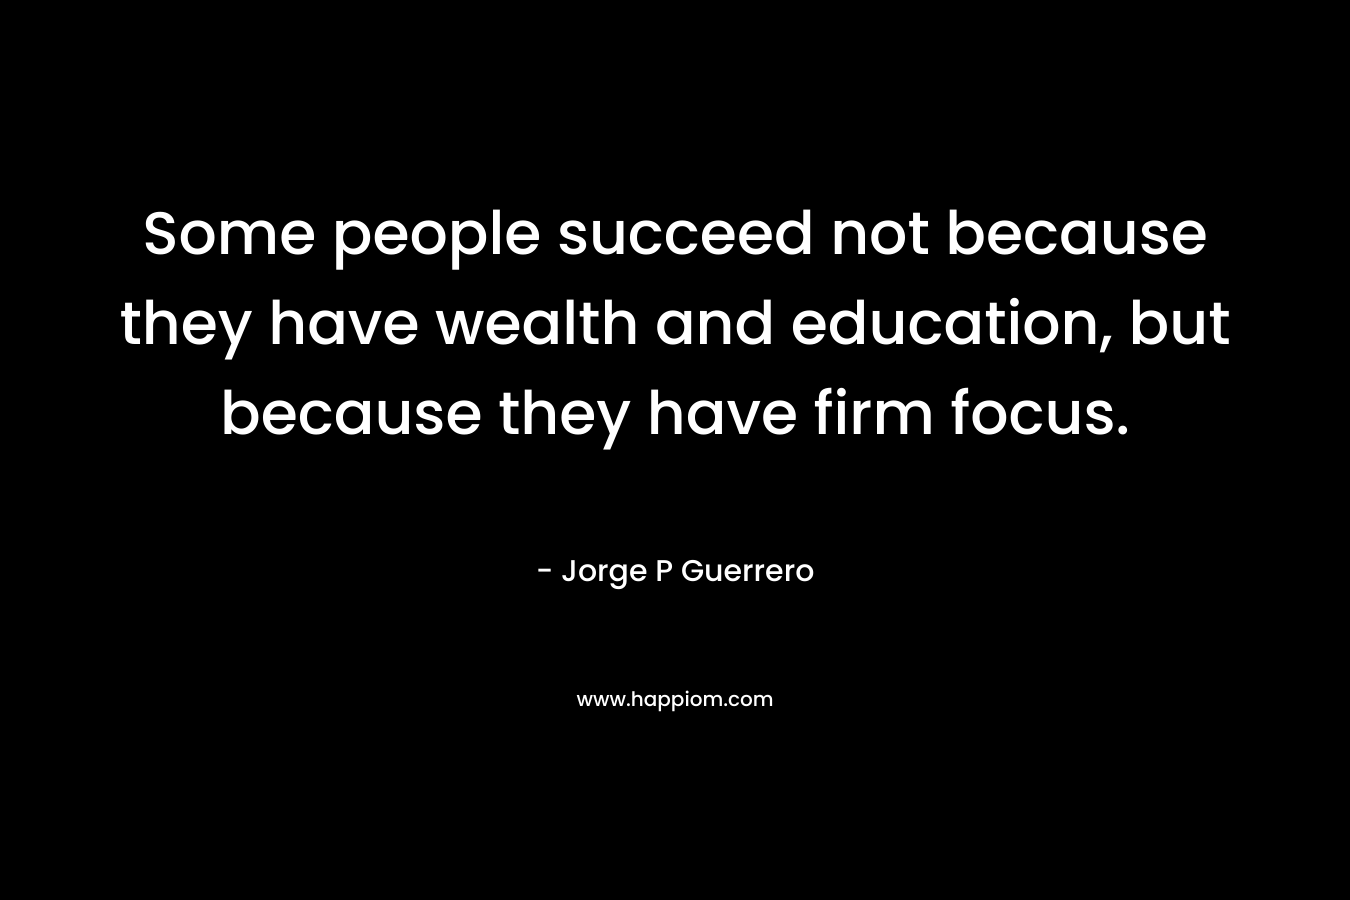 Some people succeed not because they have wealth and education, but because they have firm focus. – Jorge P Guerrero